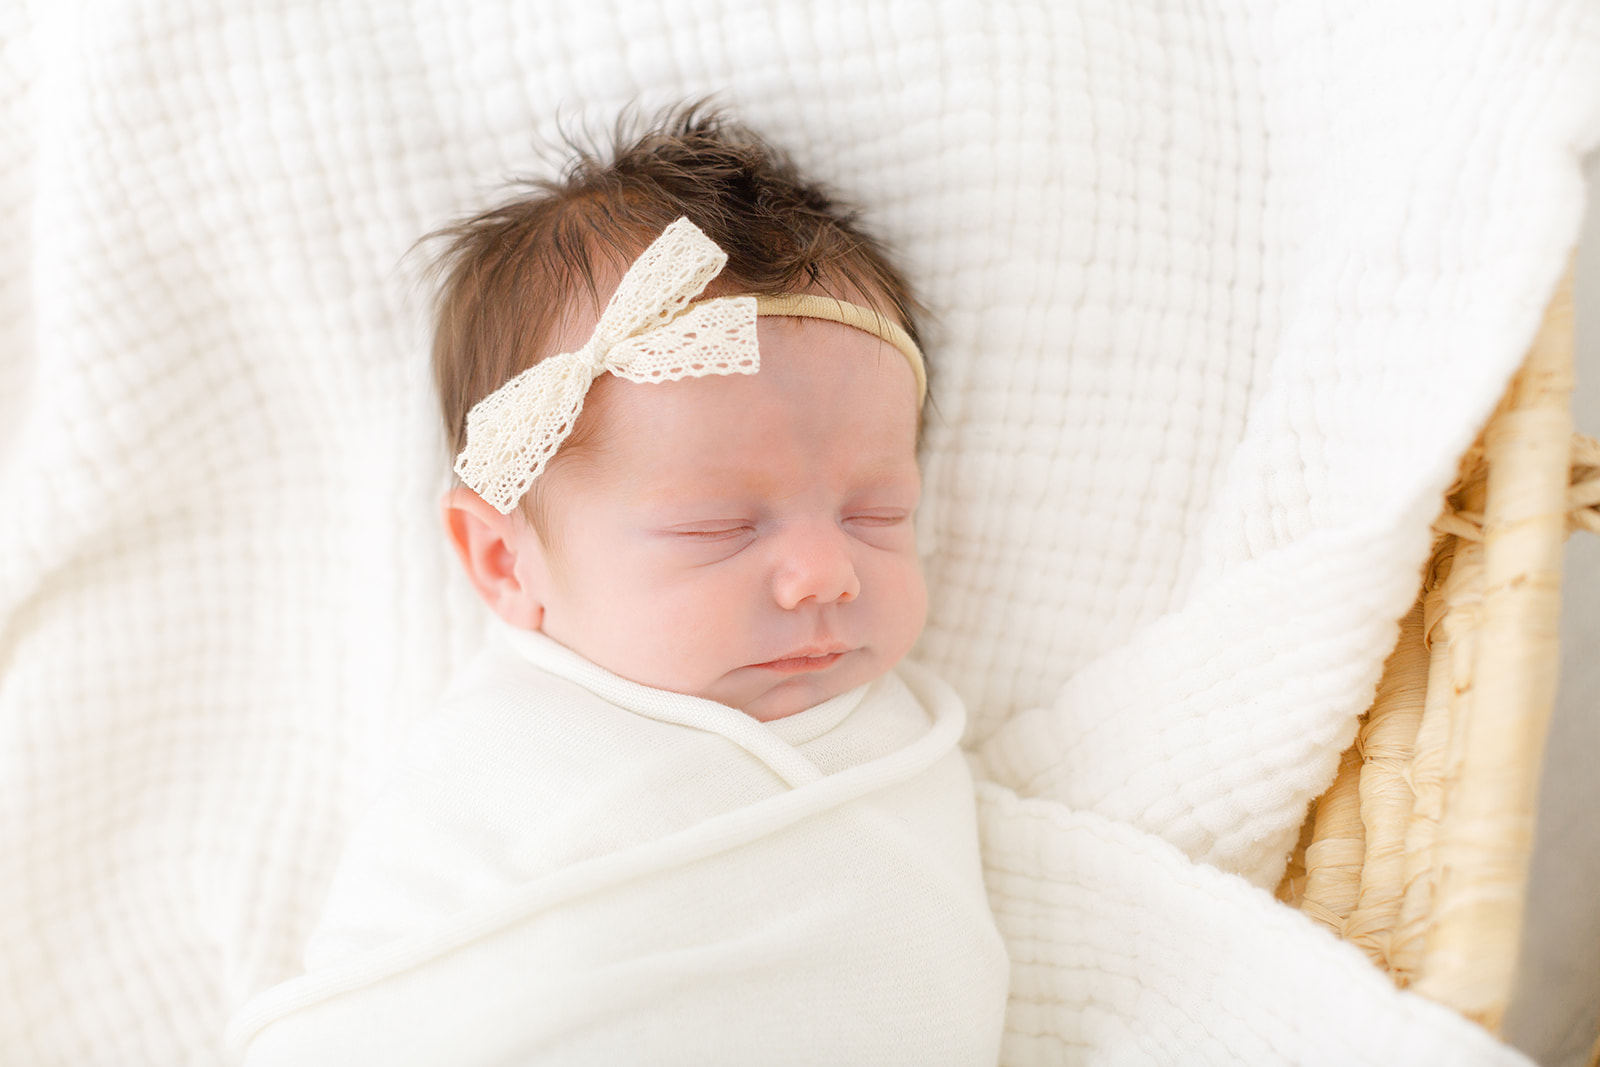 A newborn baby girl sleeps in a woven basket in a white swaddle